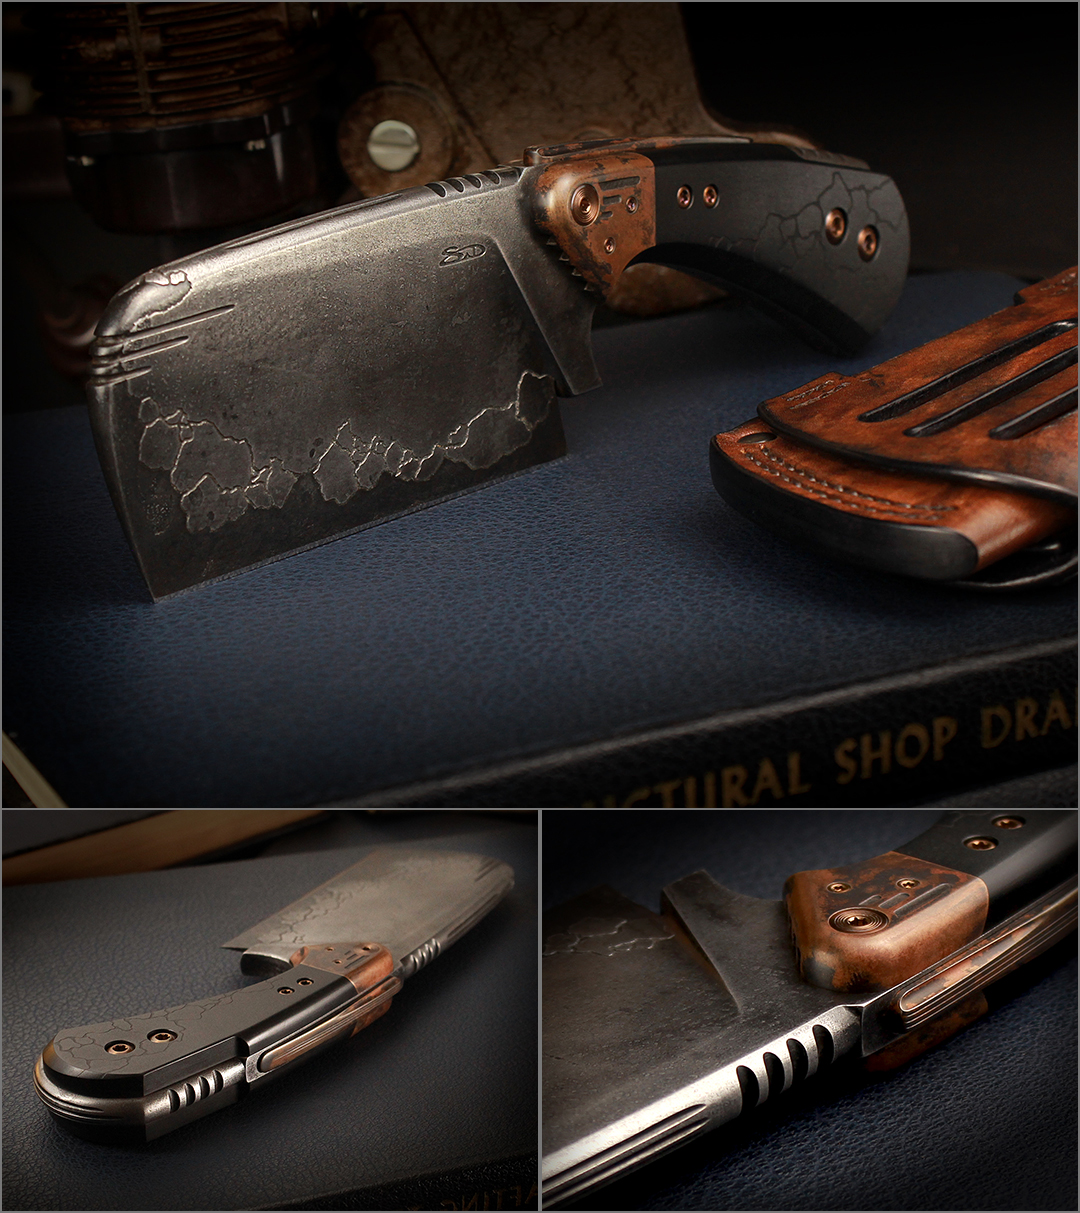 Etched Cleaver with copper bolsters and leather sheath